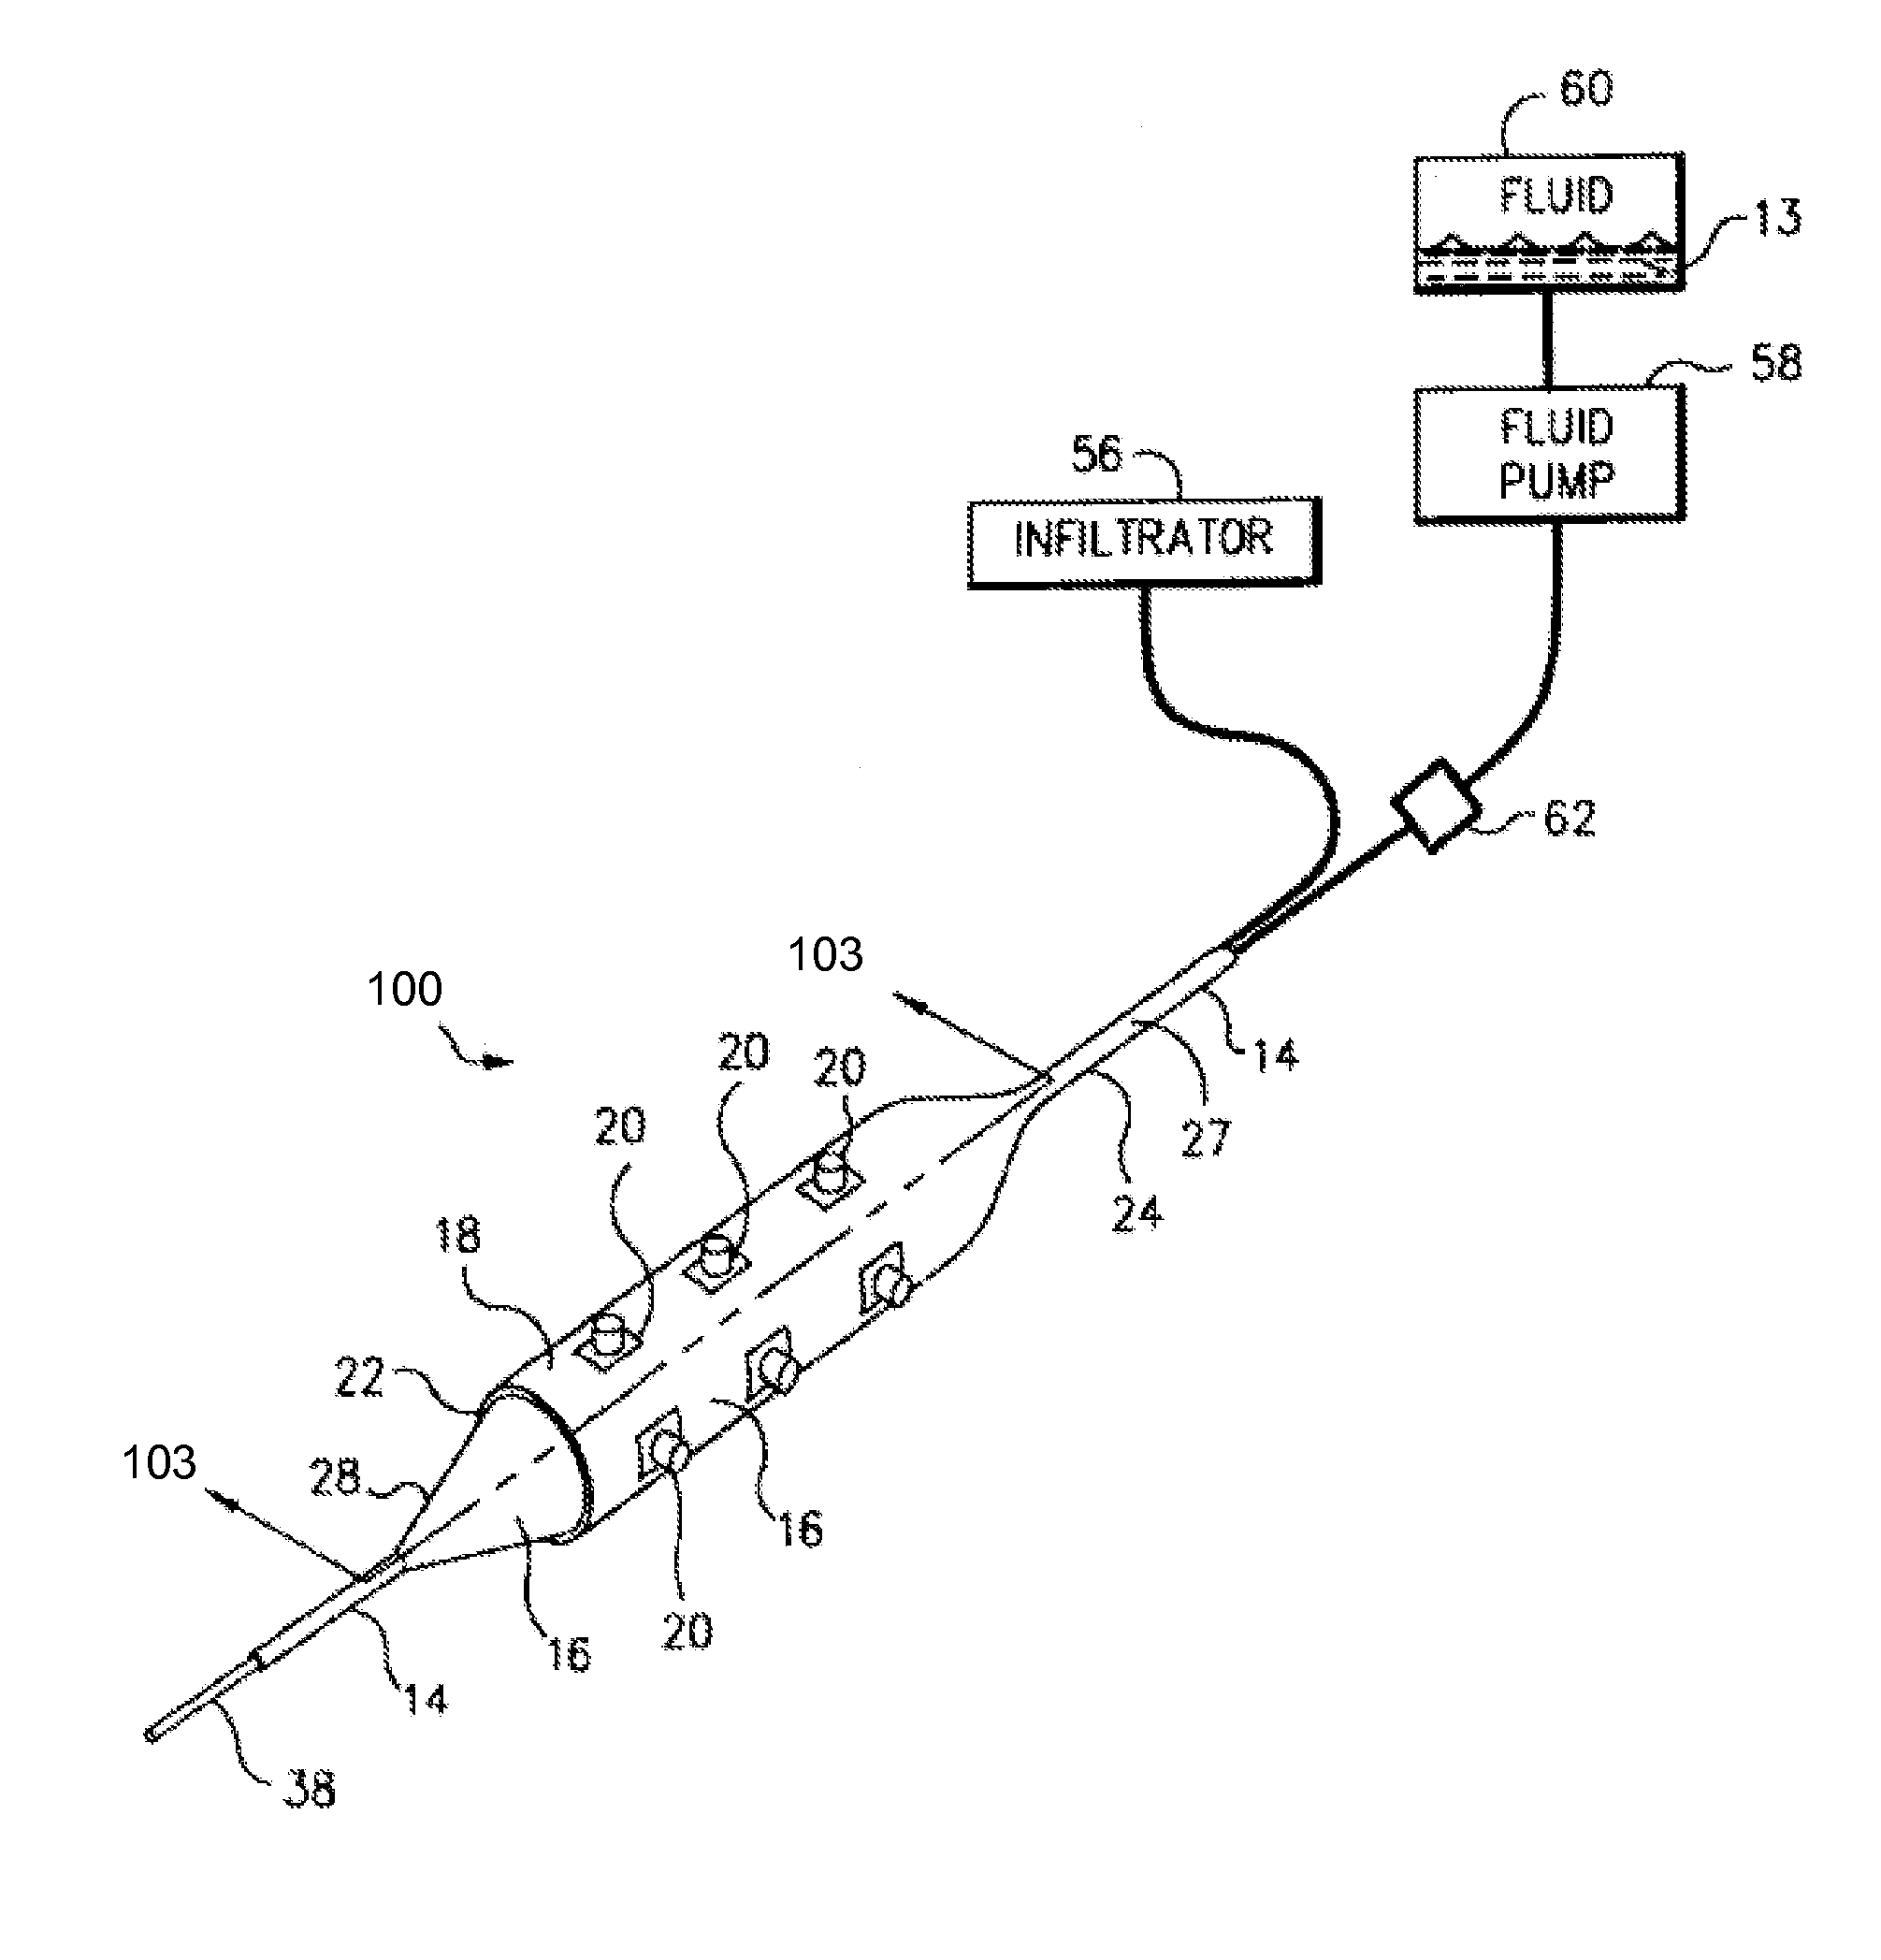 Method for delivering medication into an arterial wall for prevention of restenosis